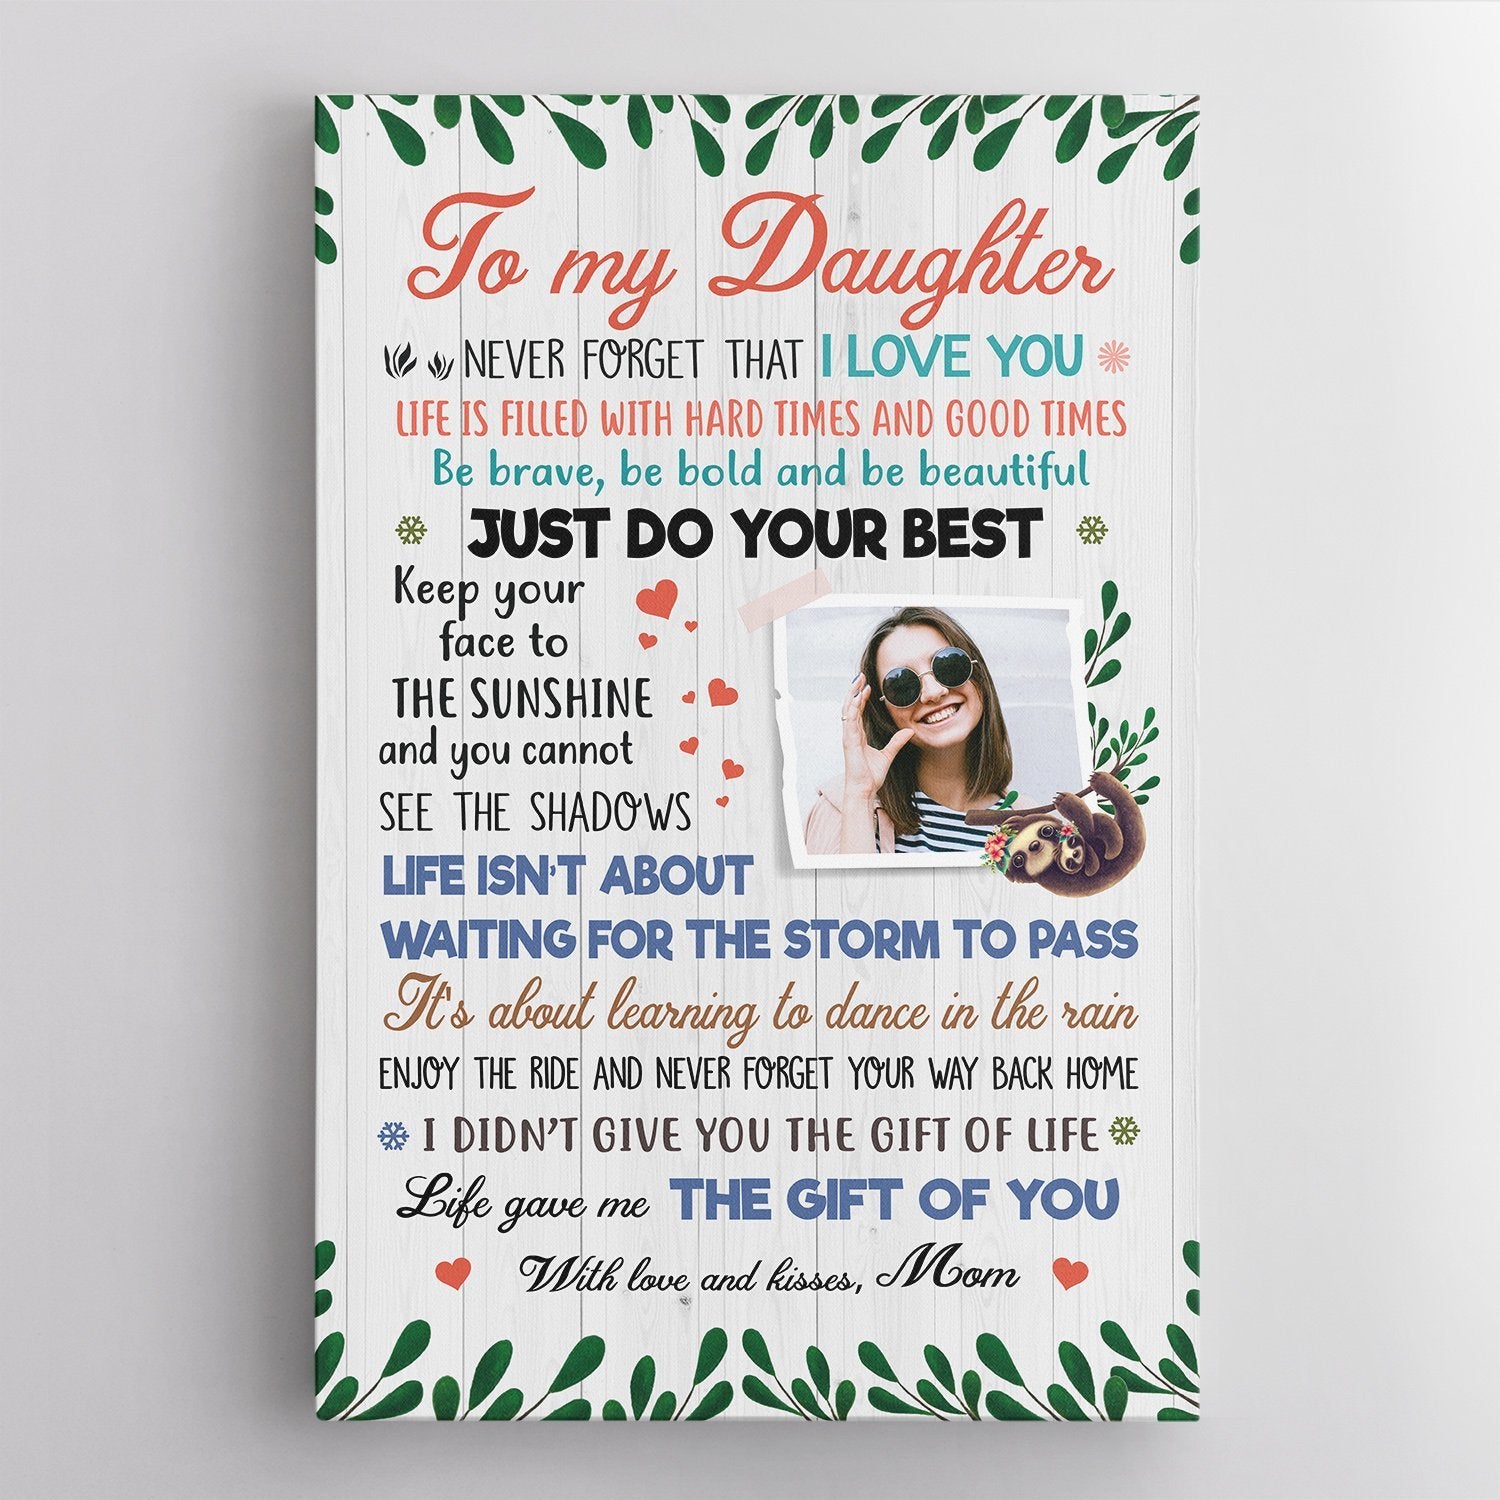 having me as a daughter is really the only gift you need  Poster for Sale  by ADV-T DS